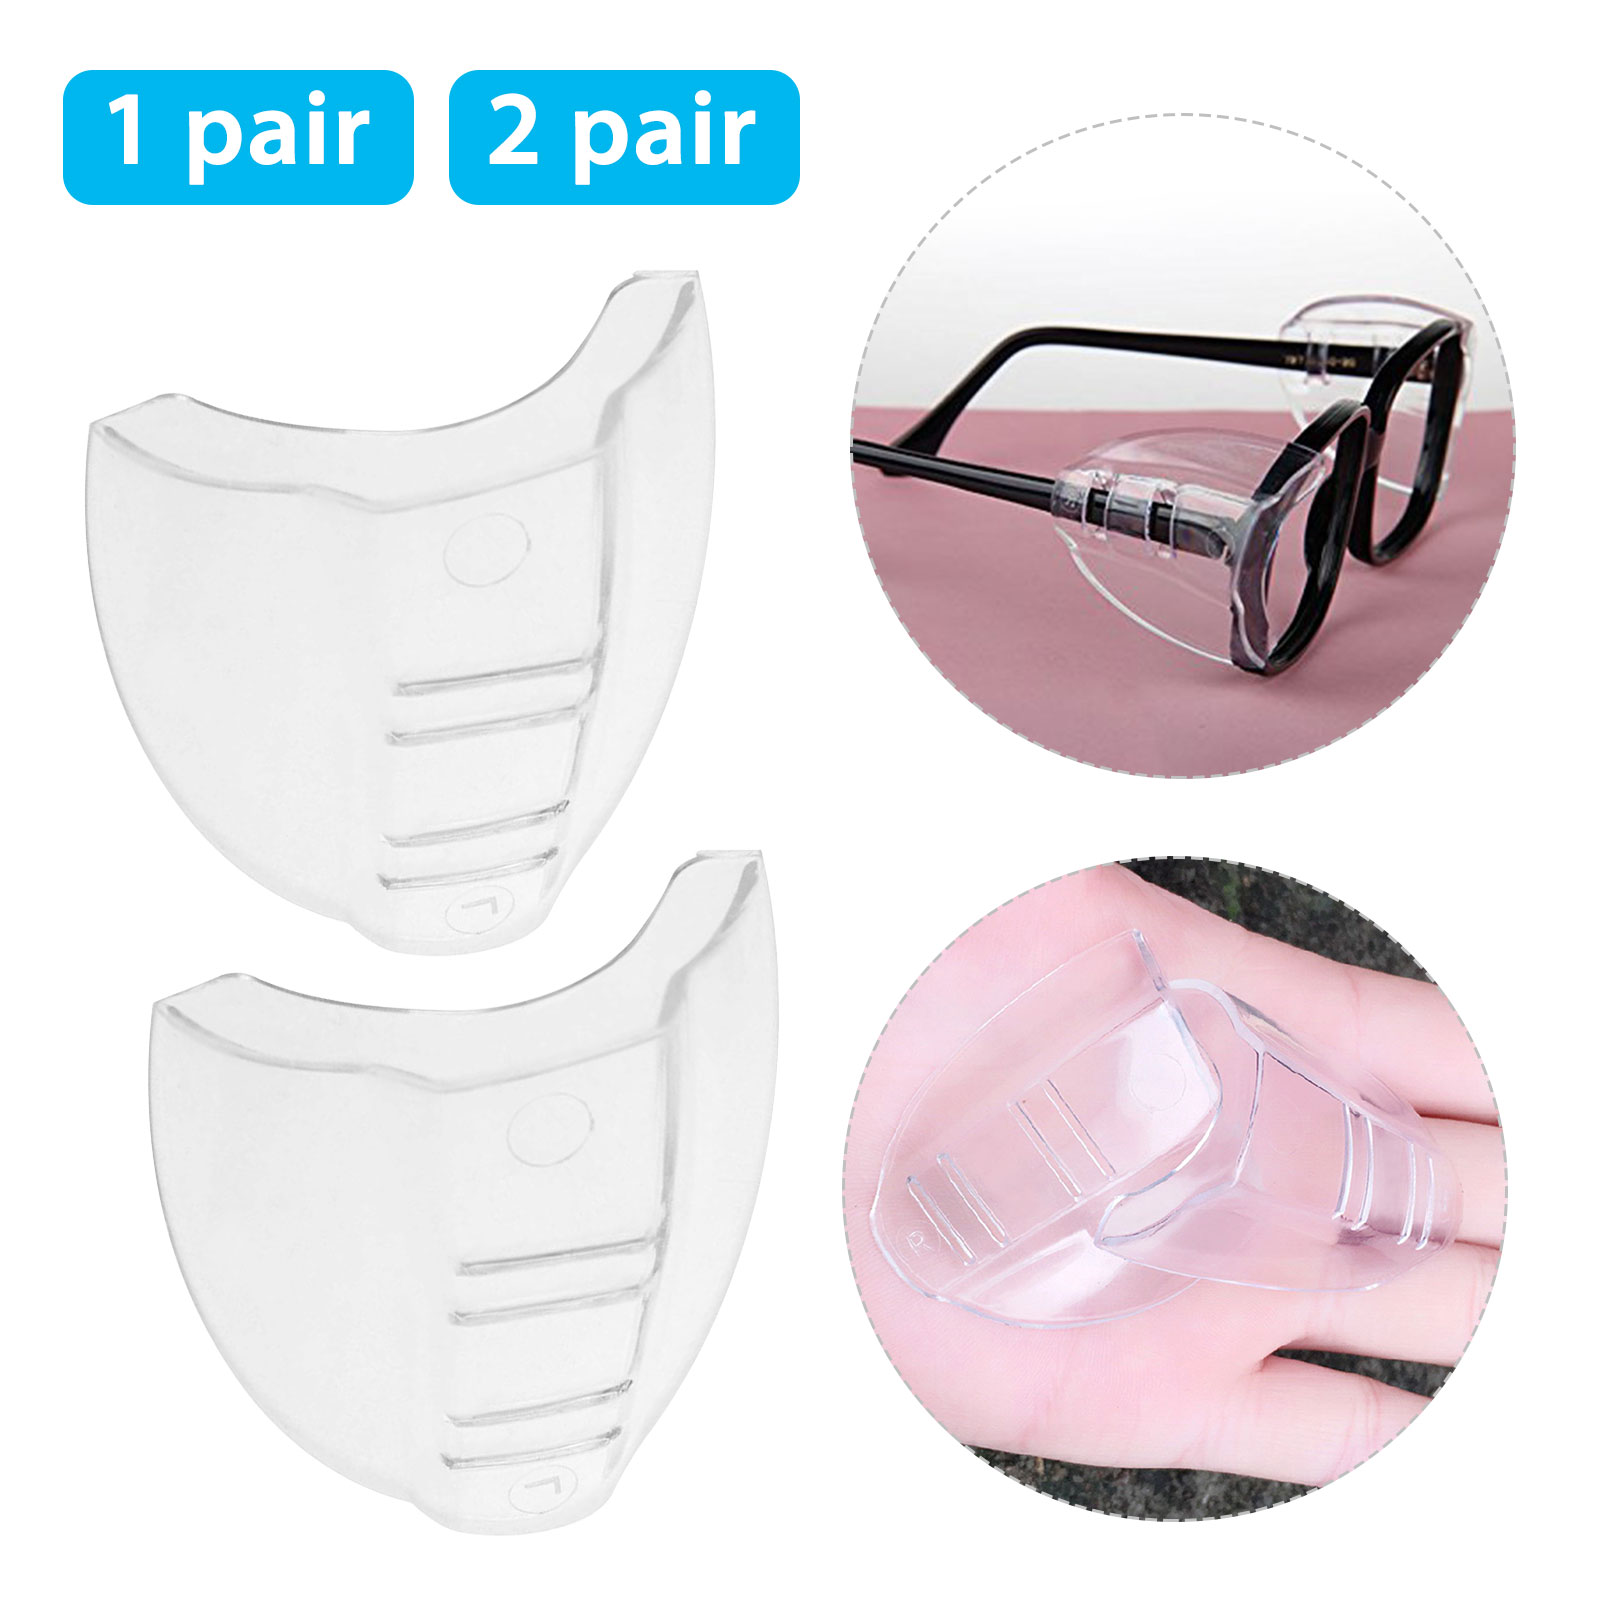 Clear Universal Flexible Protective Side Shields For Eye Glasses Safety 1 2 Pair Ebay